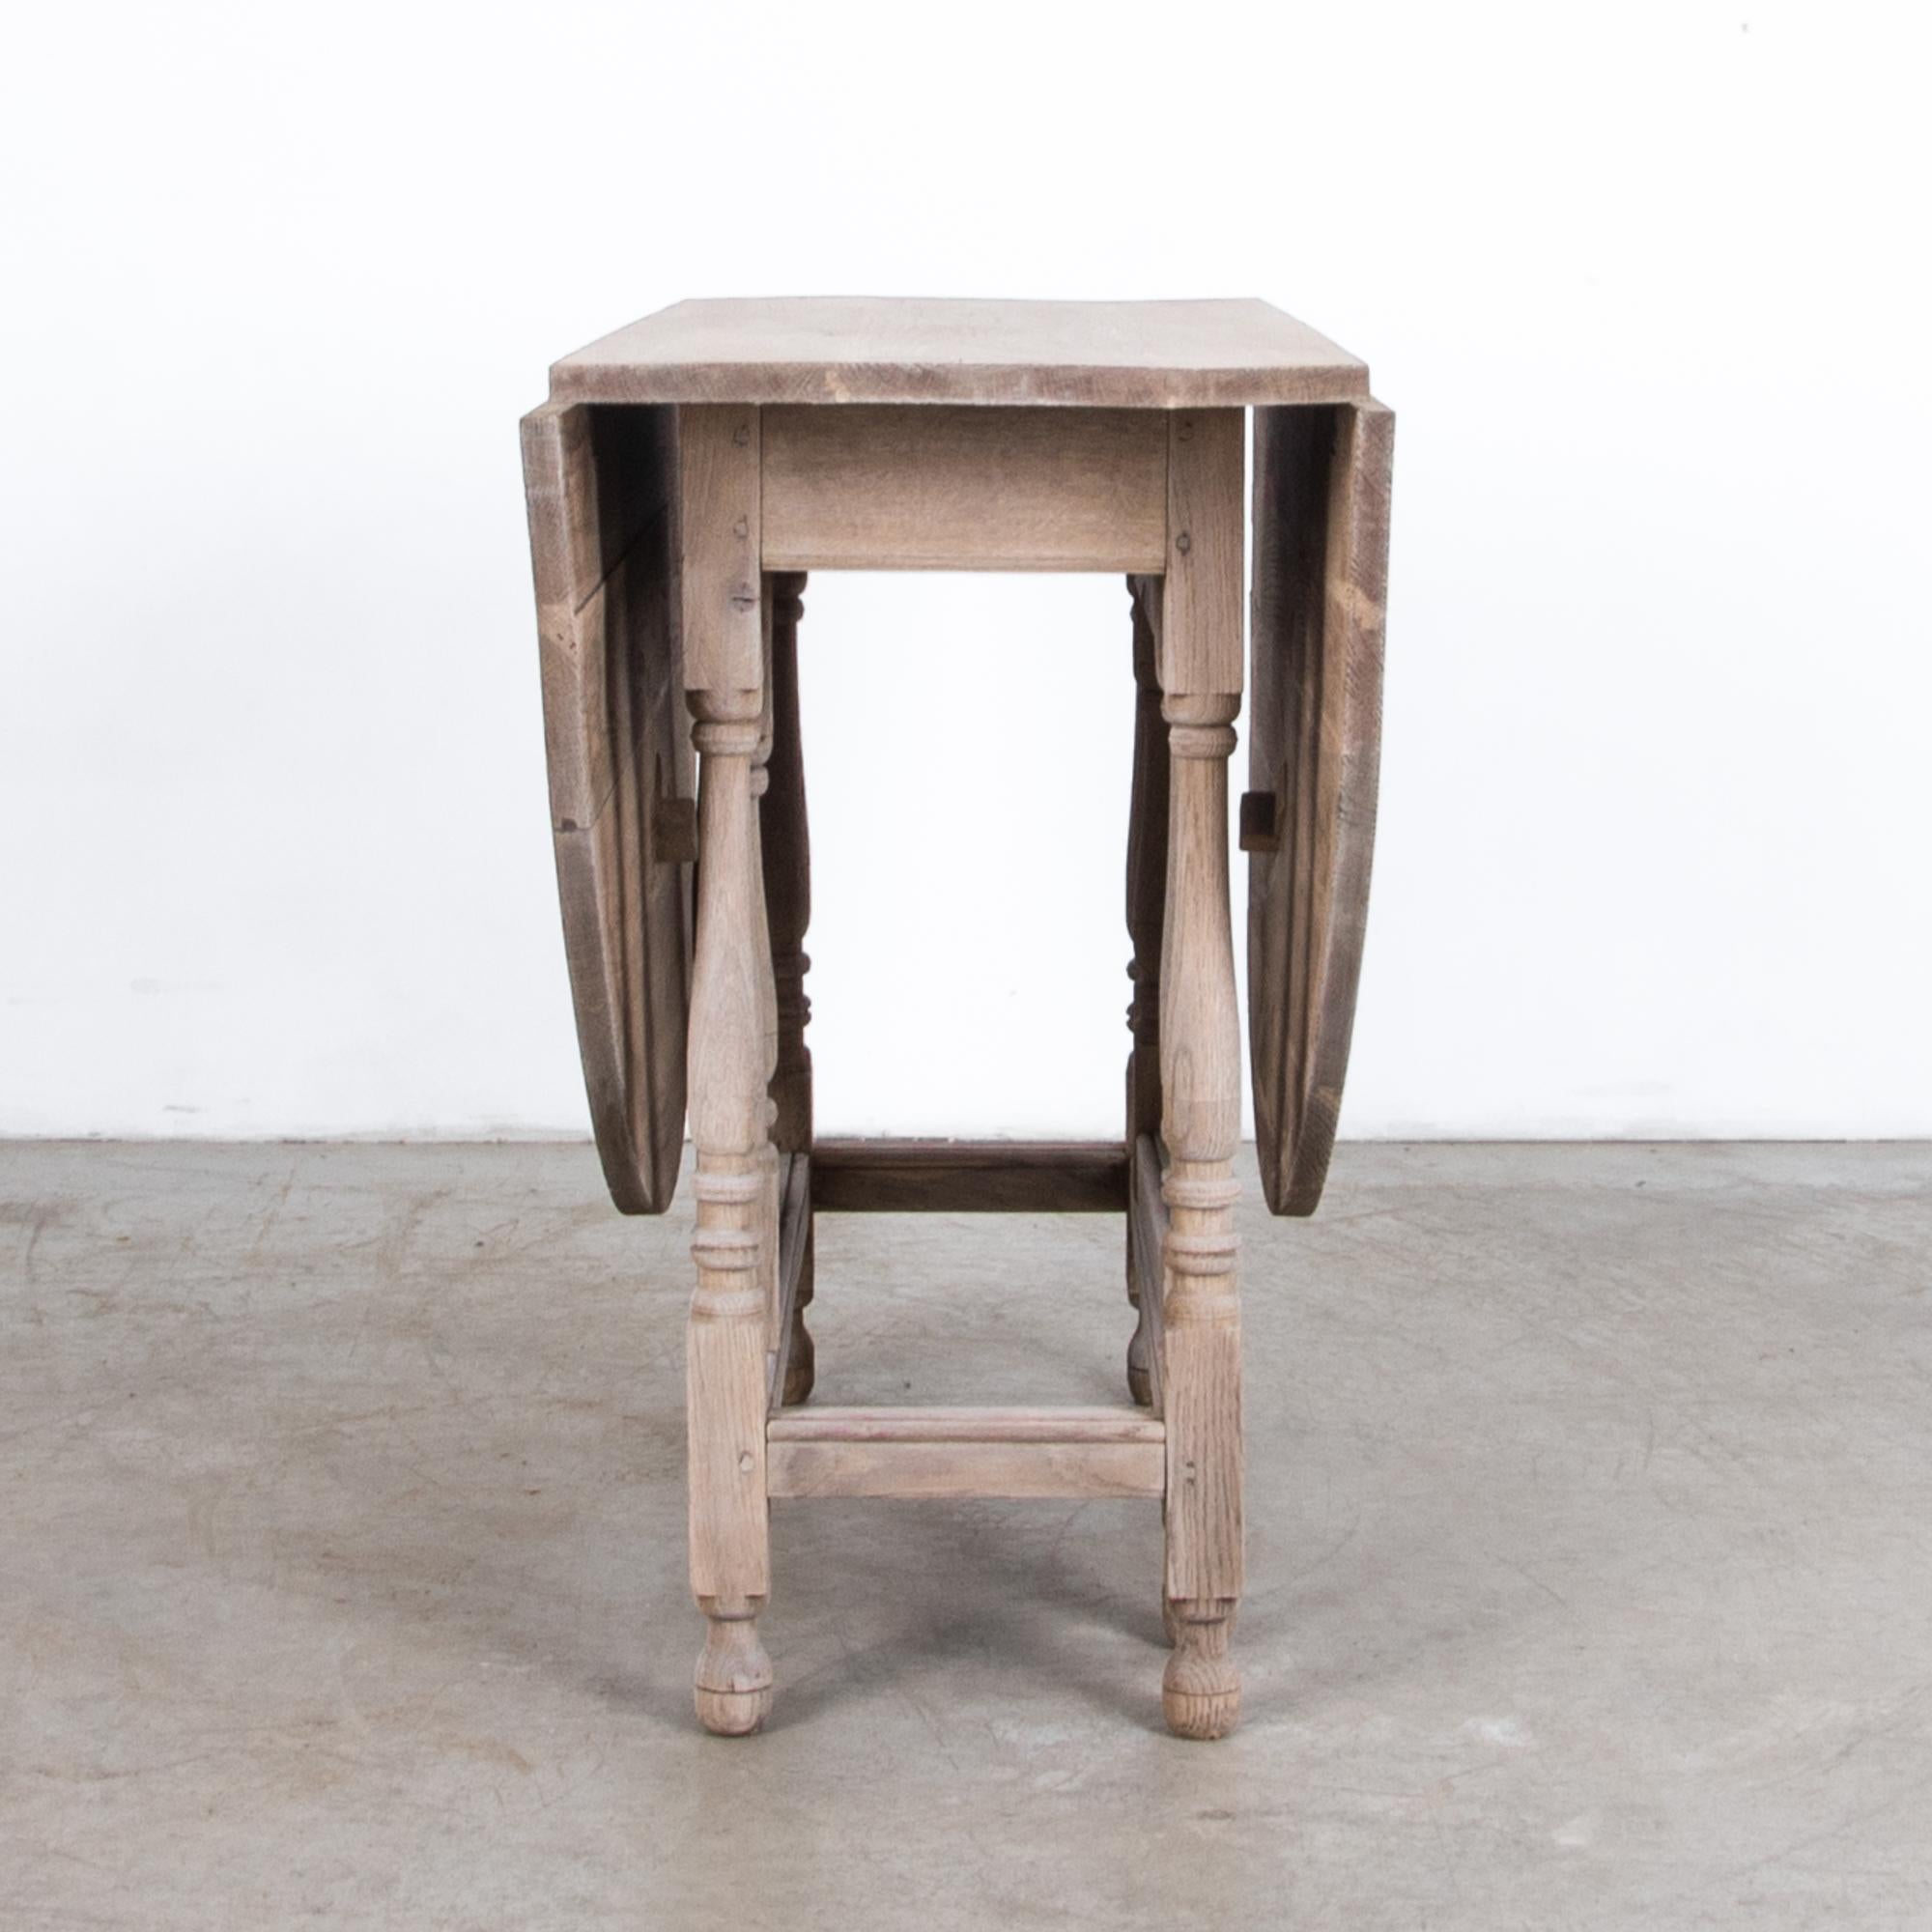 A folding gate leg table from the United Kingdom, circa 1900. The folding gate leg makes this table versatile and practical while retaining stability, and style. Carved details and turned table legs give a classical inflection, “twisted barley